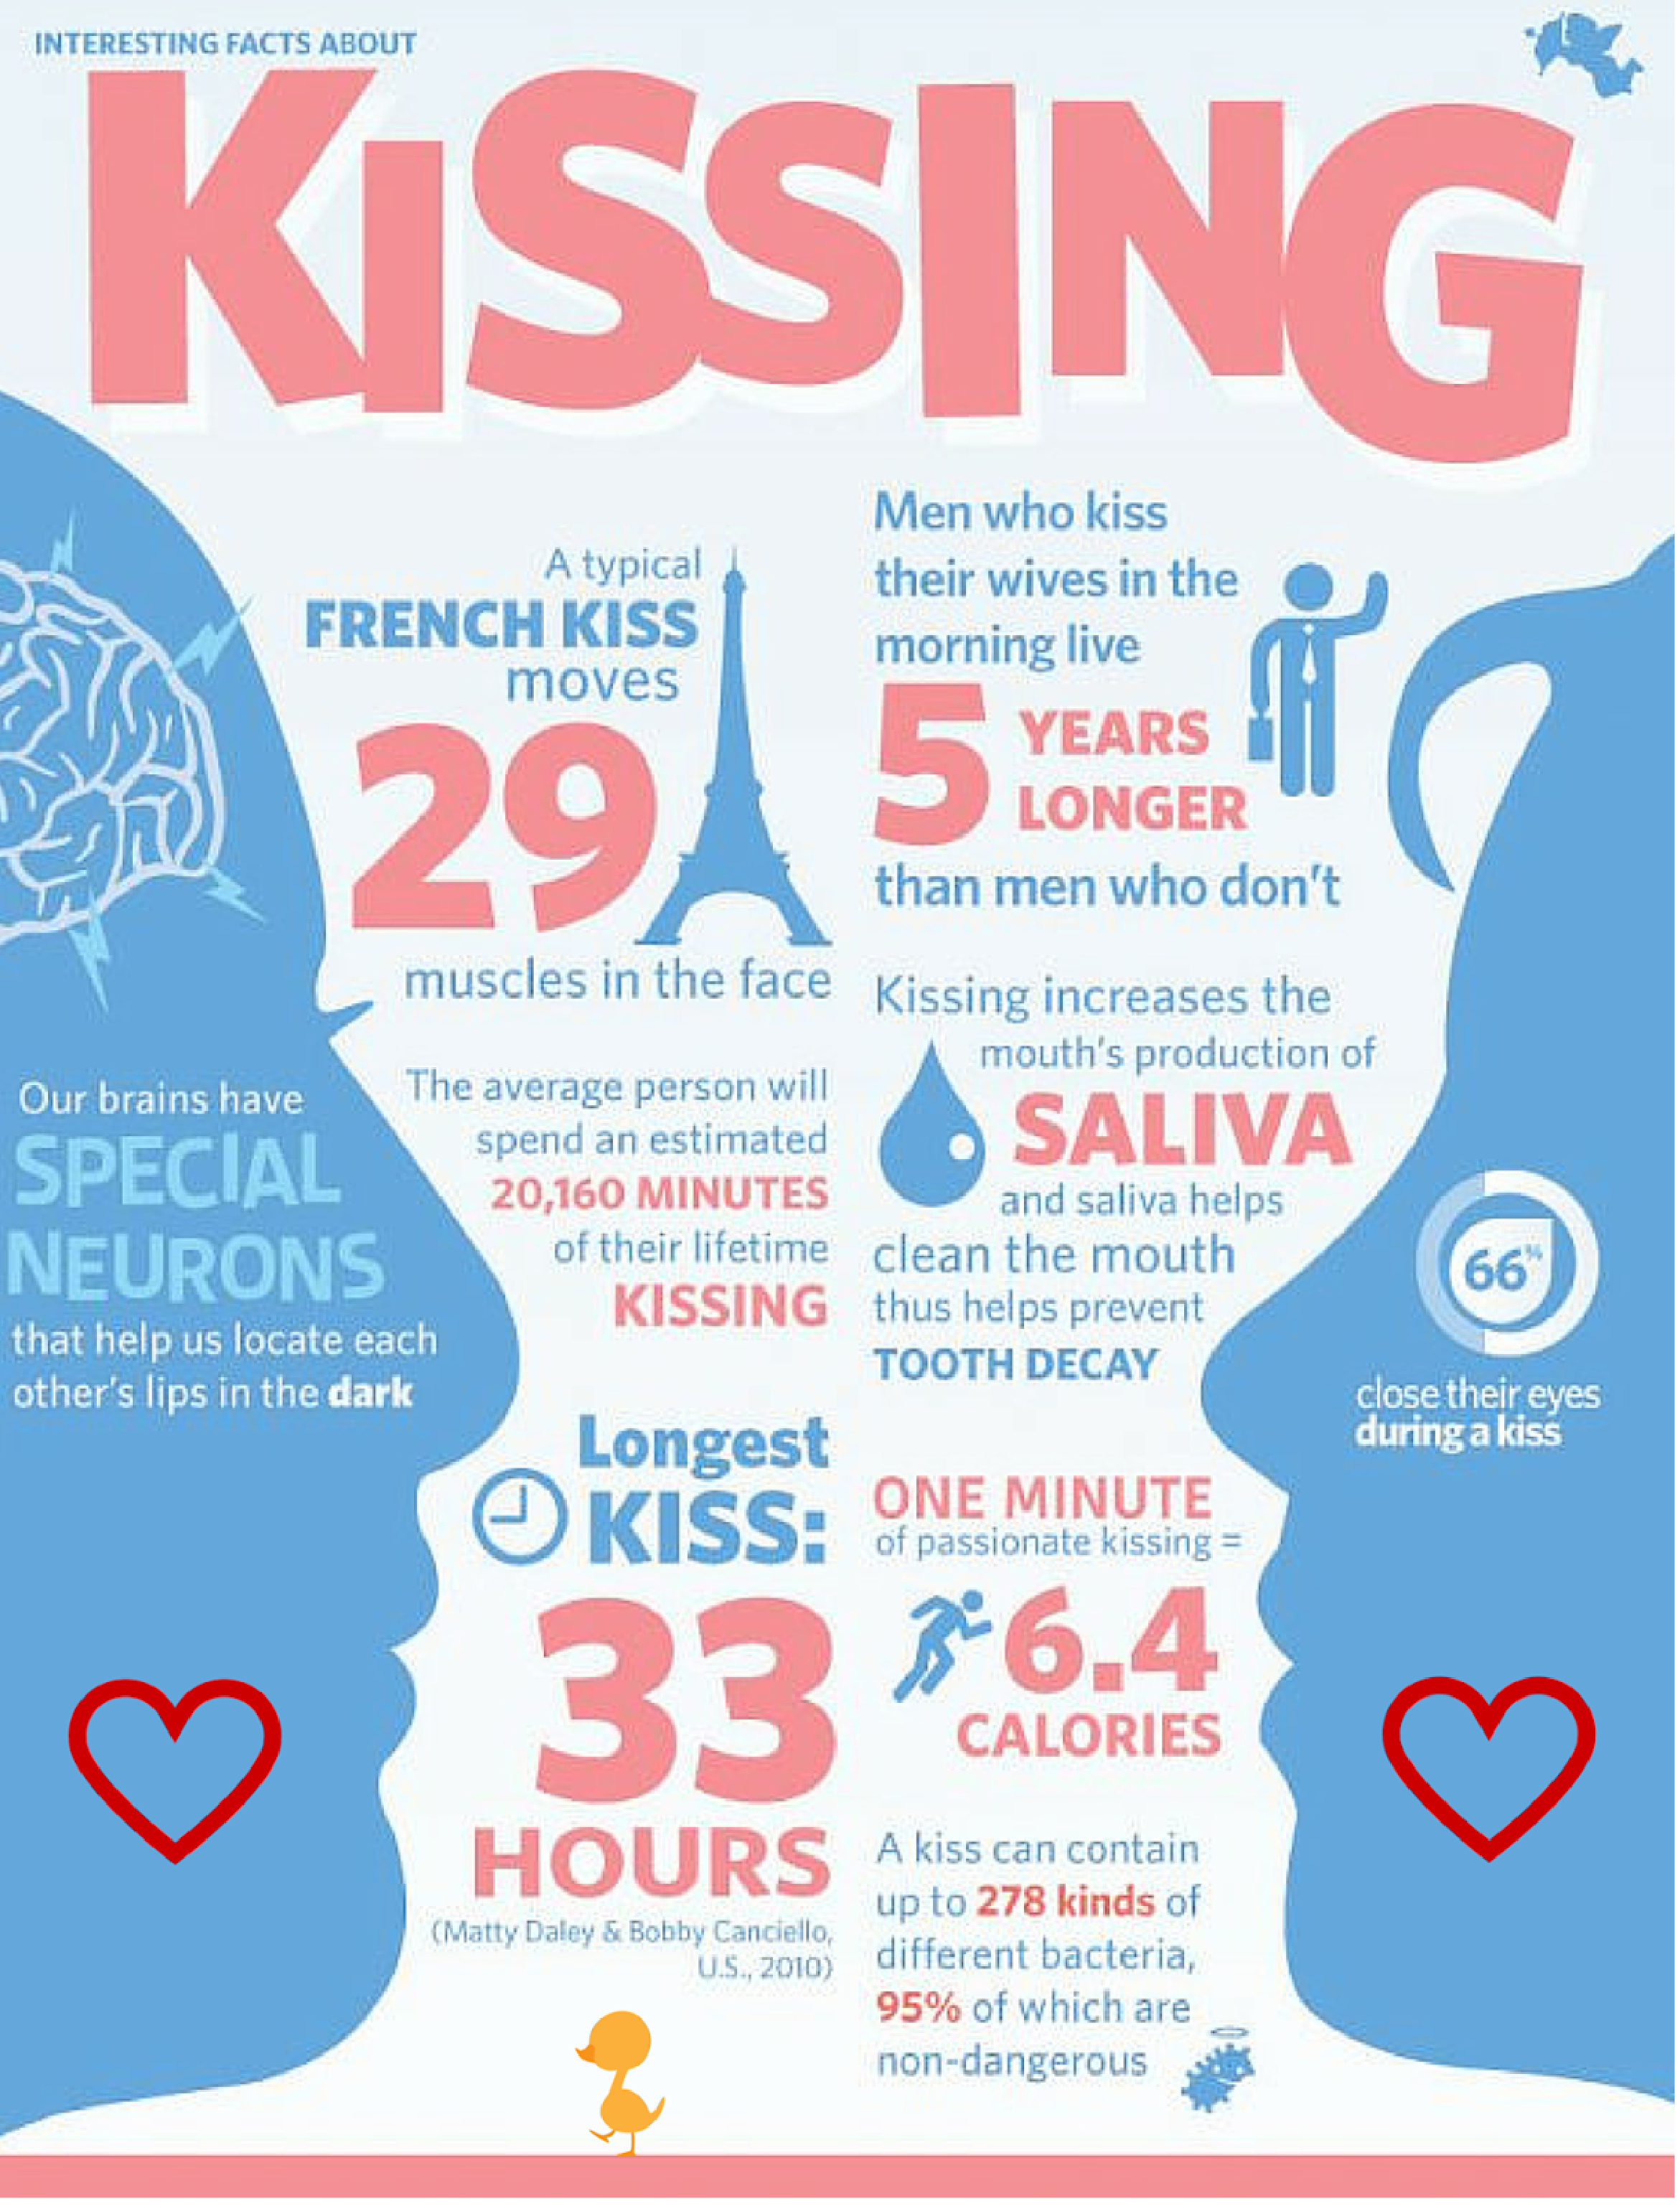 Interesting Facts About Kissing